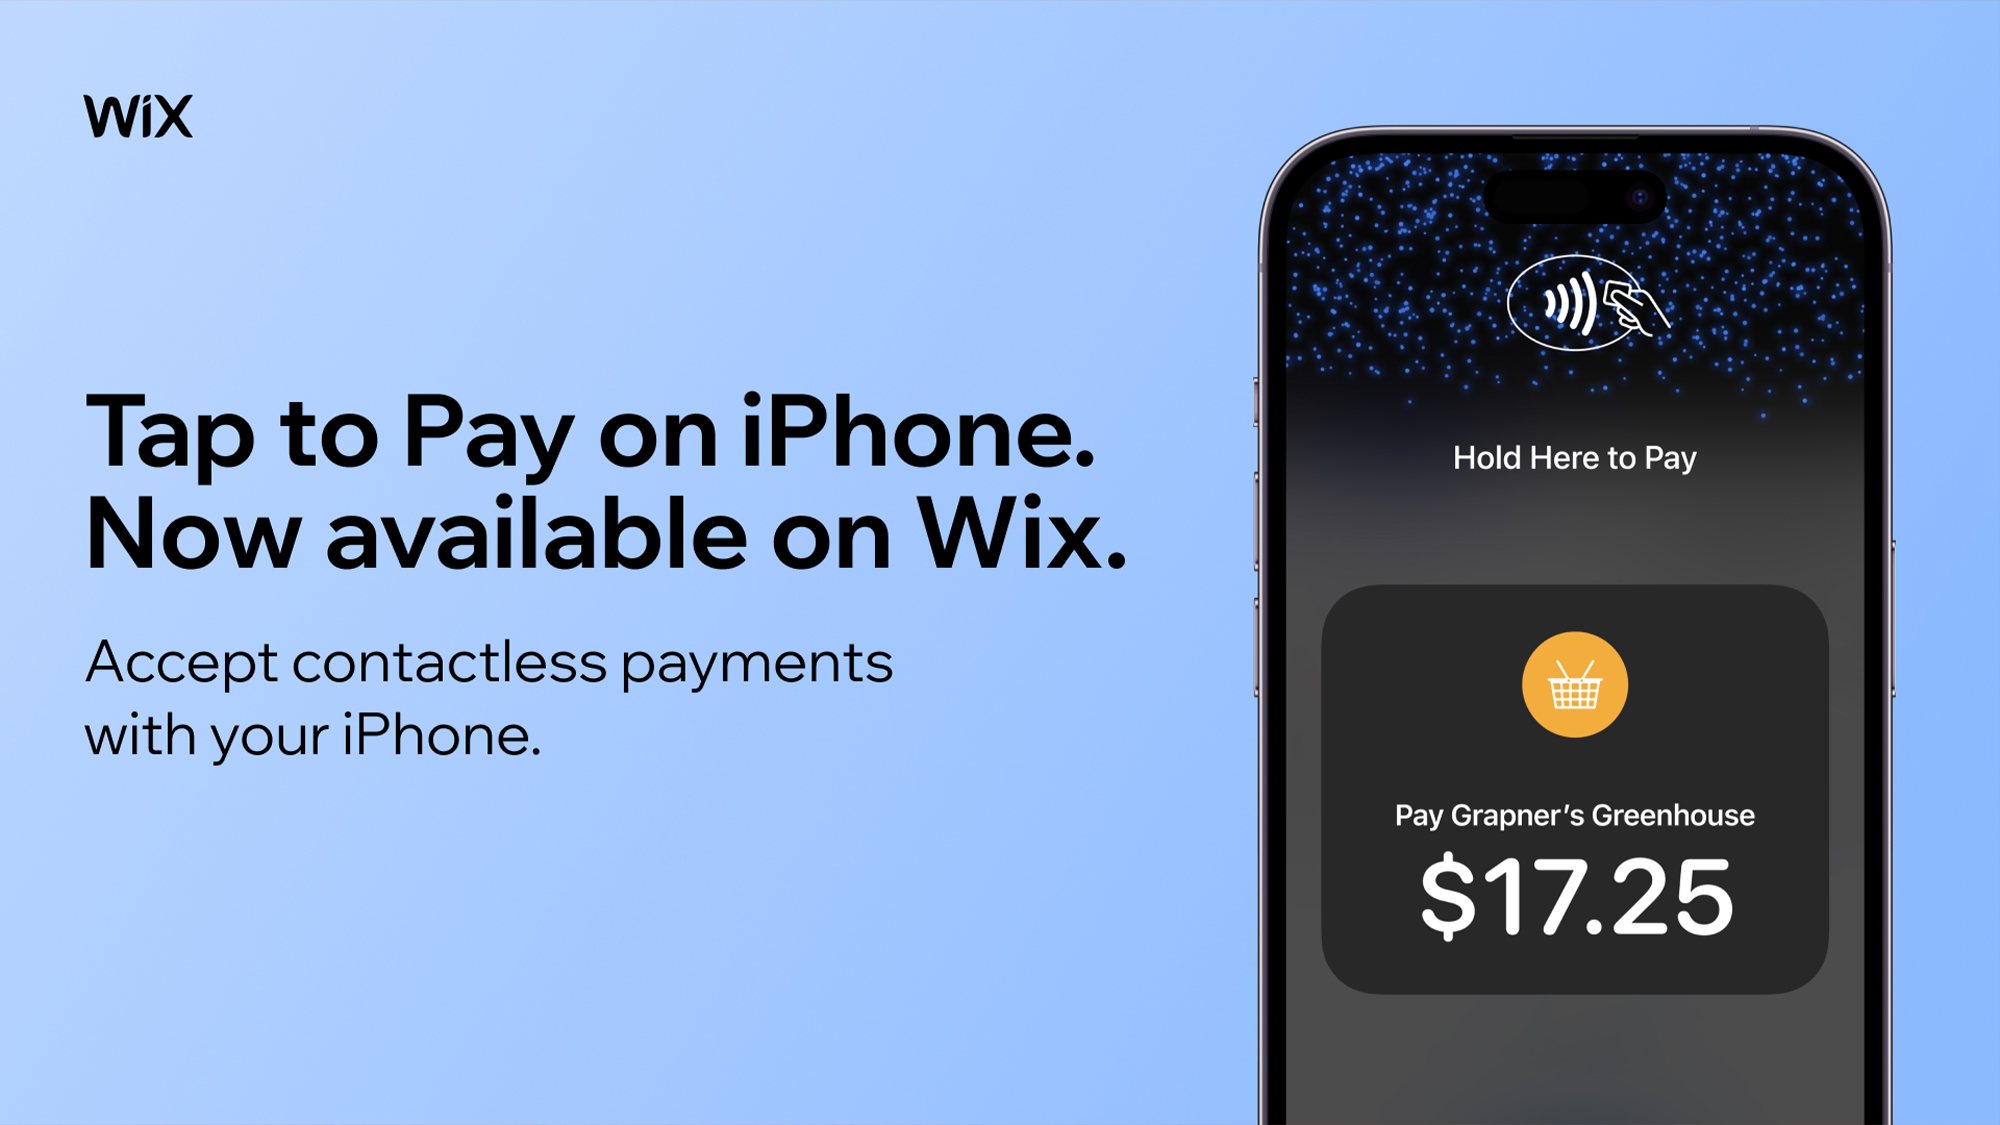 Tap to Pay on iPhone displayed on a smartphone